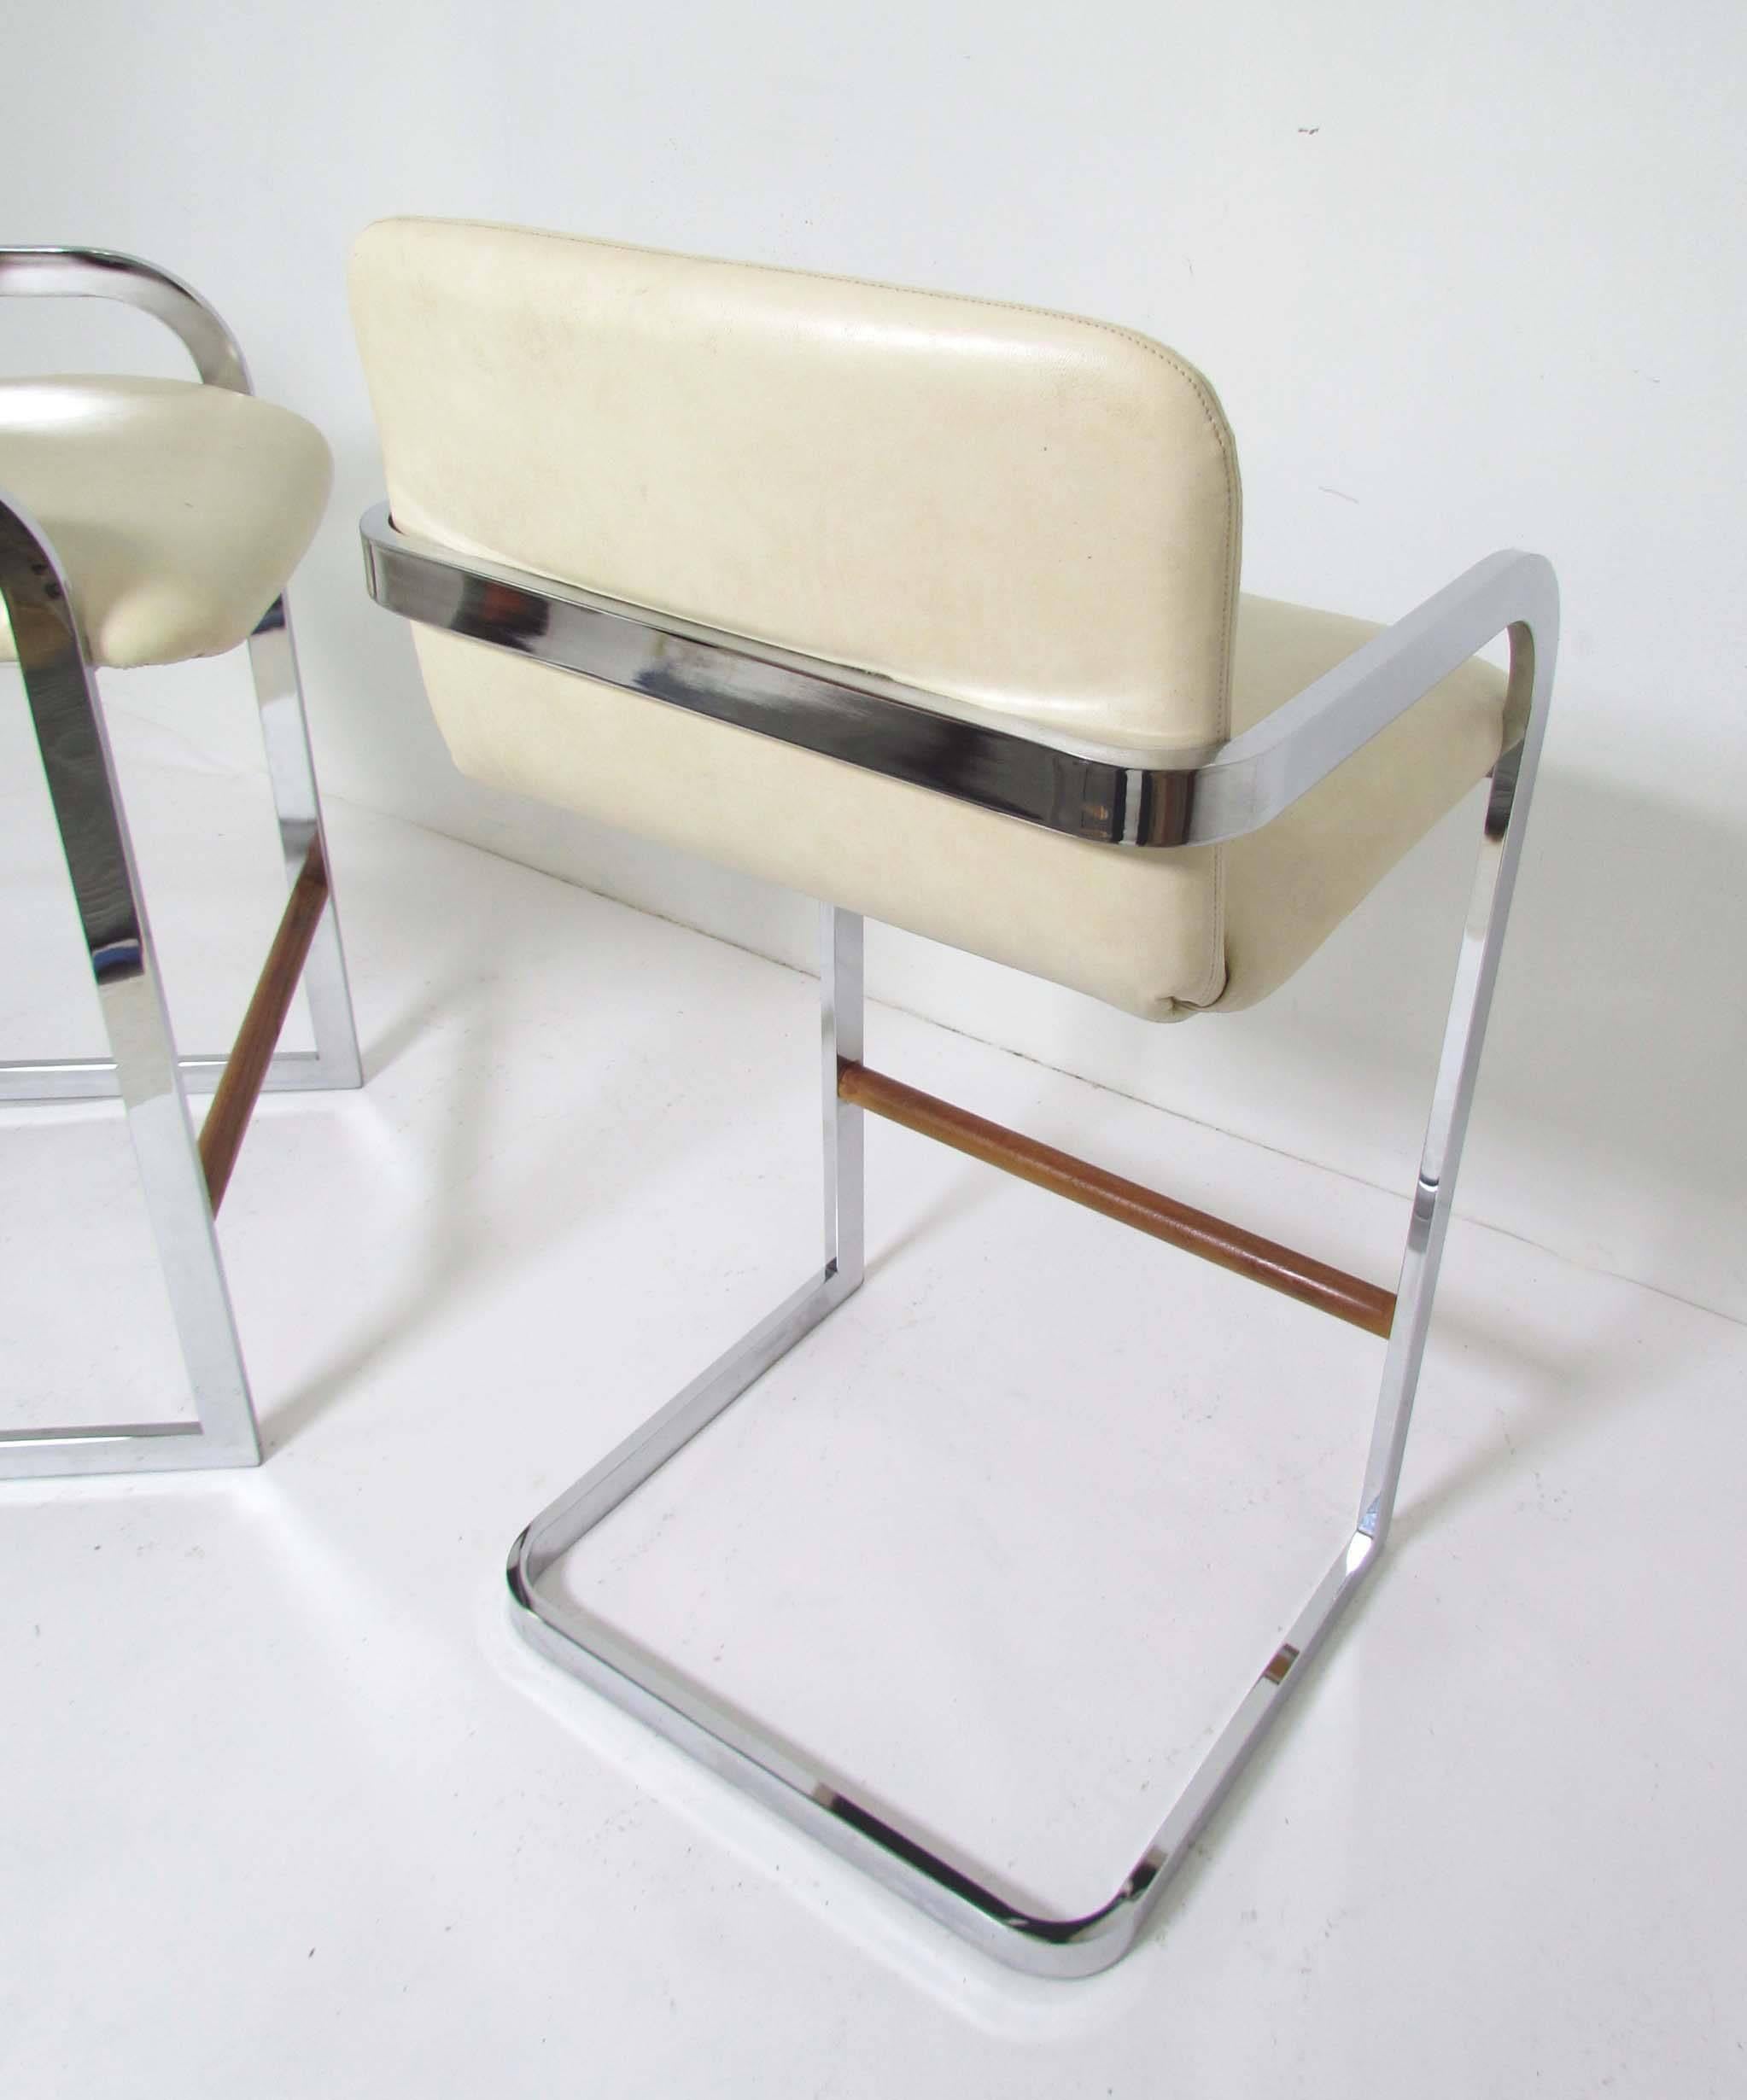 Mid-Century Modern Pair of Chrome Cantilever Bar Stools by Design Institute America (DIA)